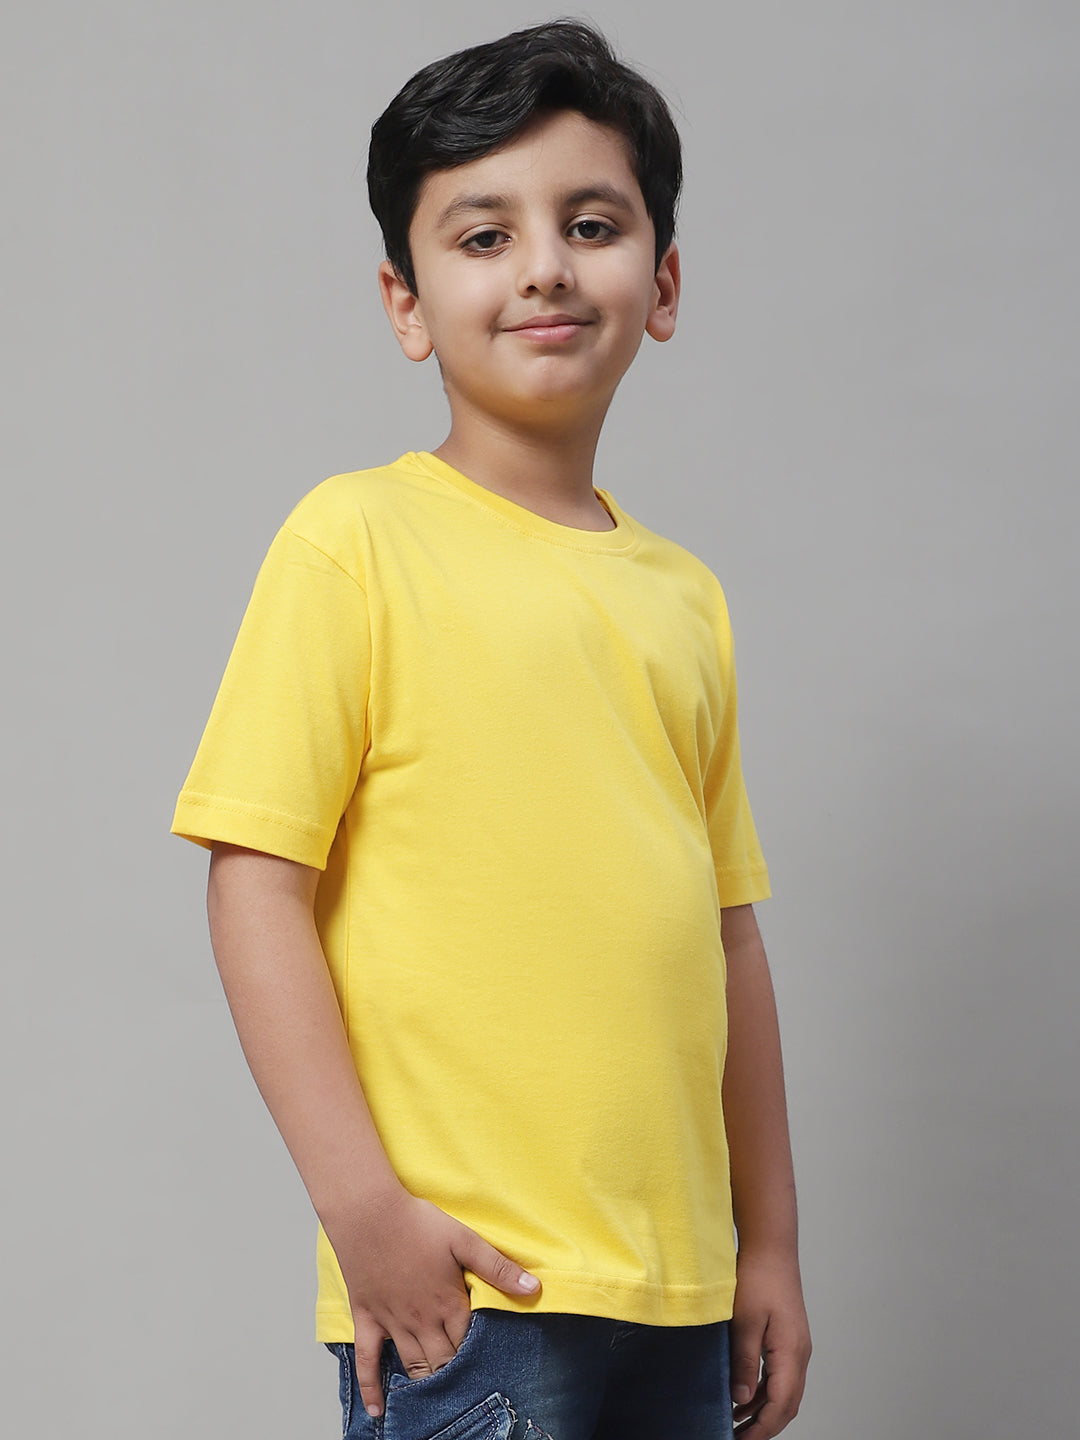 Pure Cotton Half Sleeves Round Neck 7-12Y Boys T-Shirt - Friskers